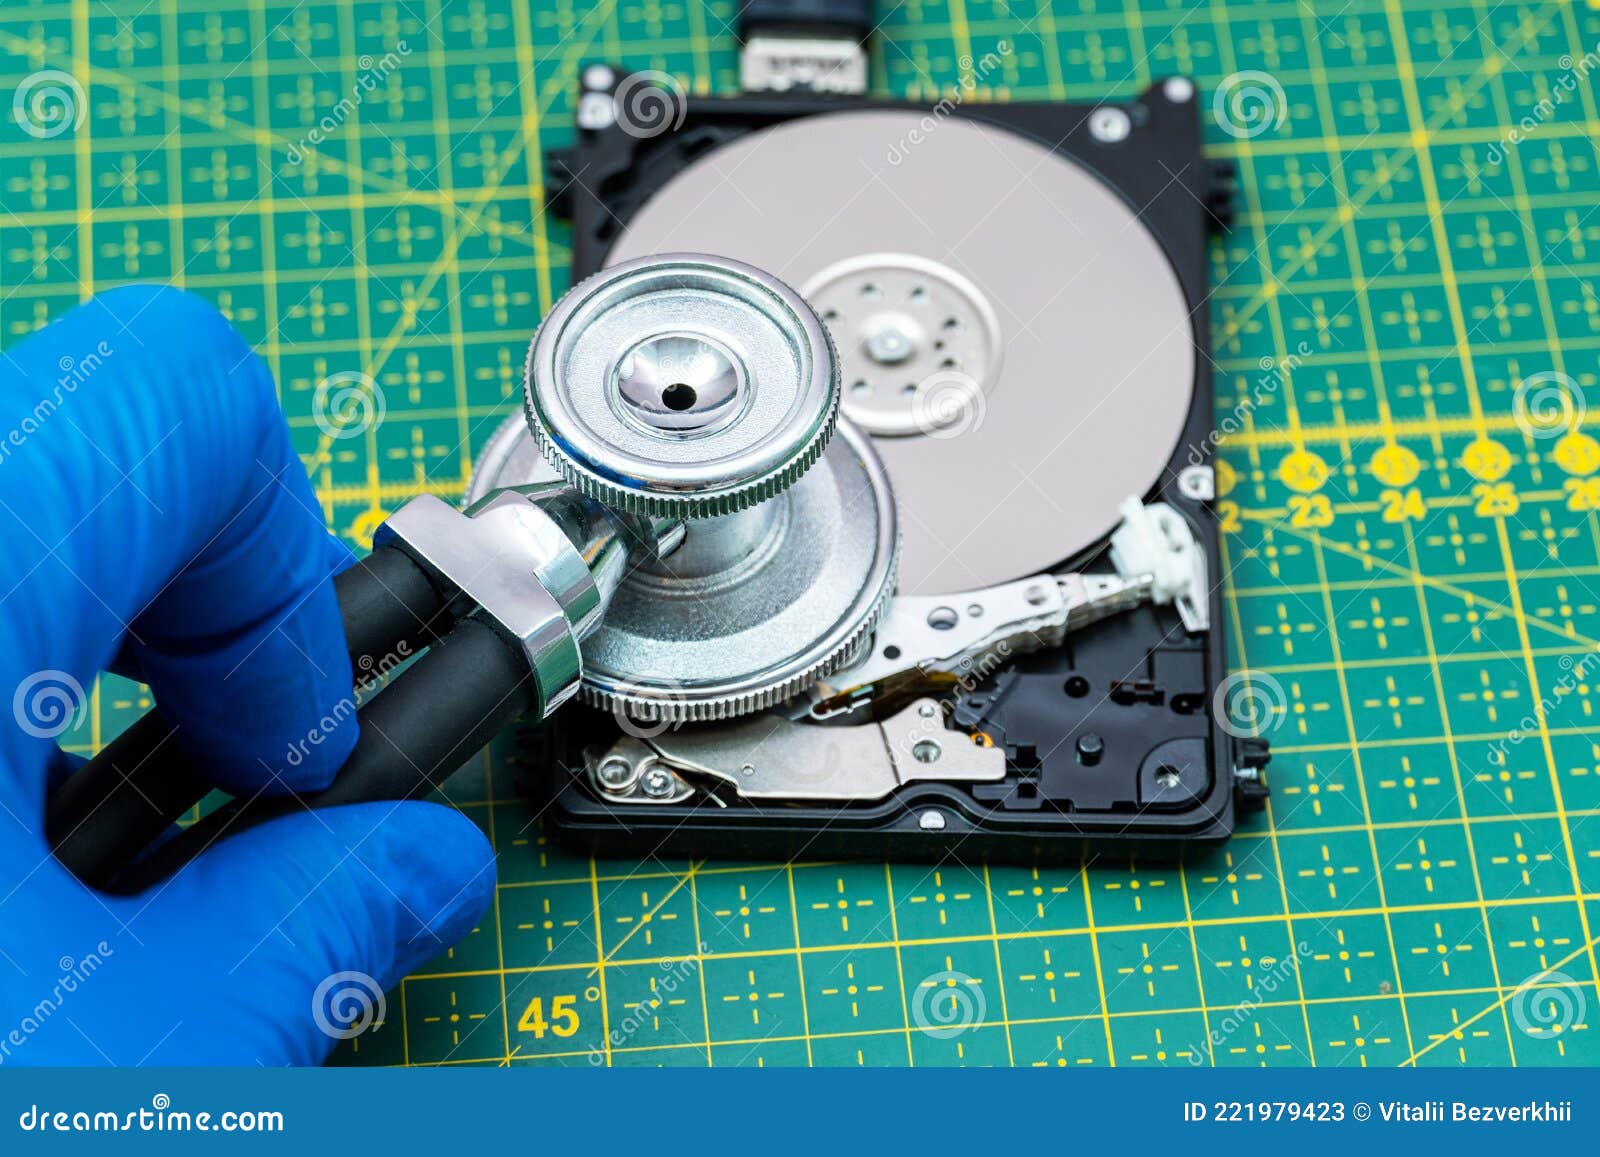 Hard Drive Diagnostics with a Stethoscope. Recovery, Search Lost Data, Information in Repair Service Stock Image - of disk, disassembling: